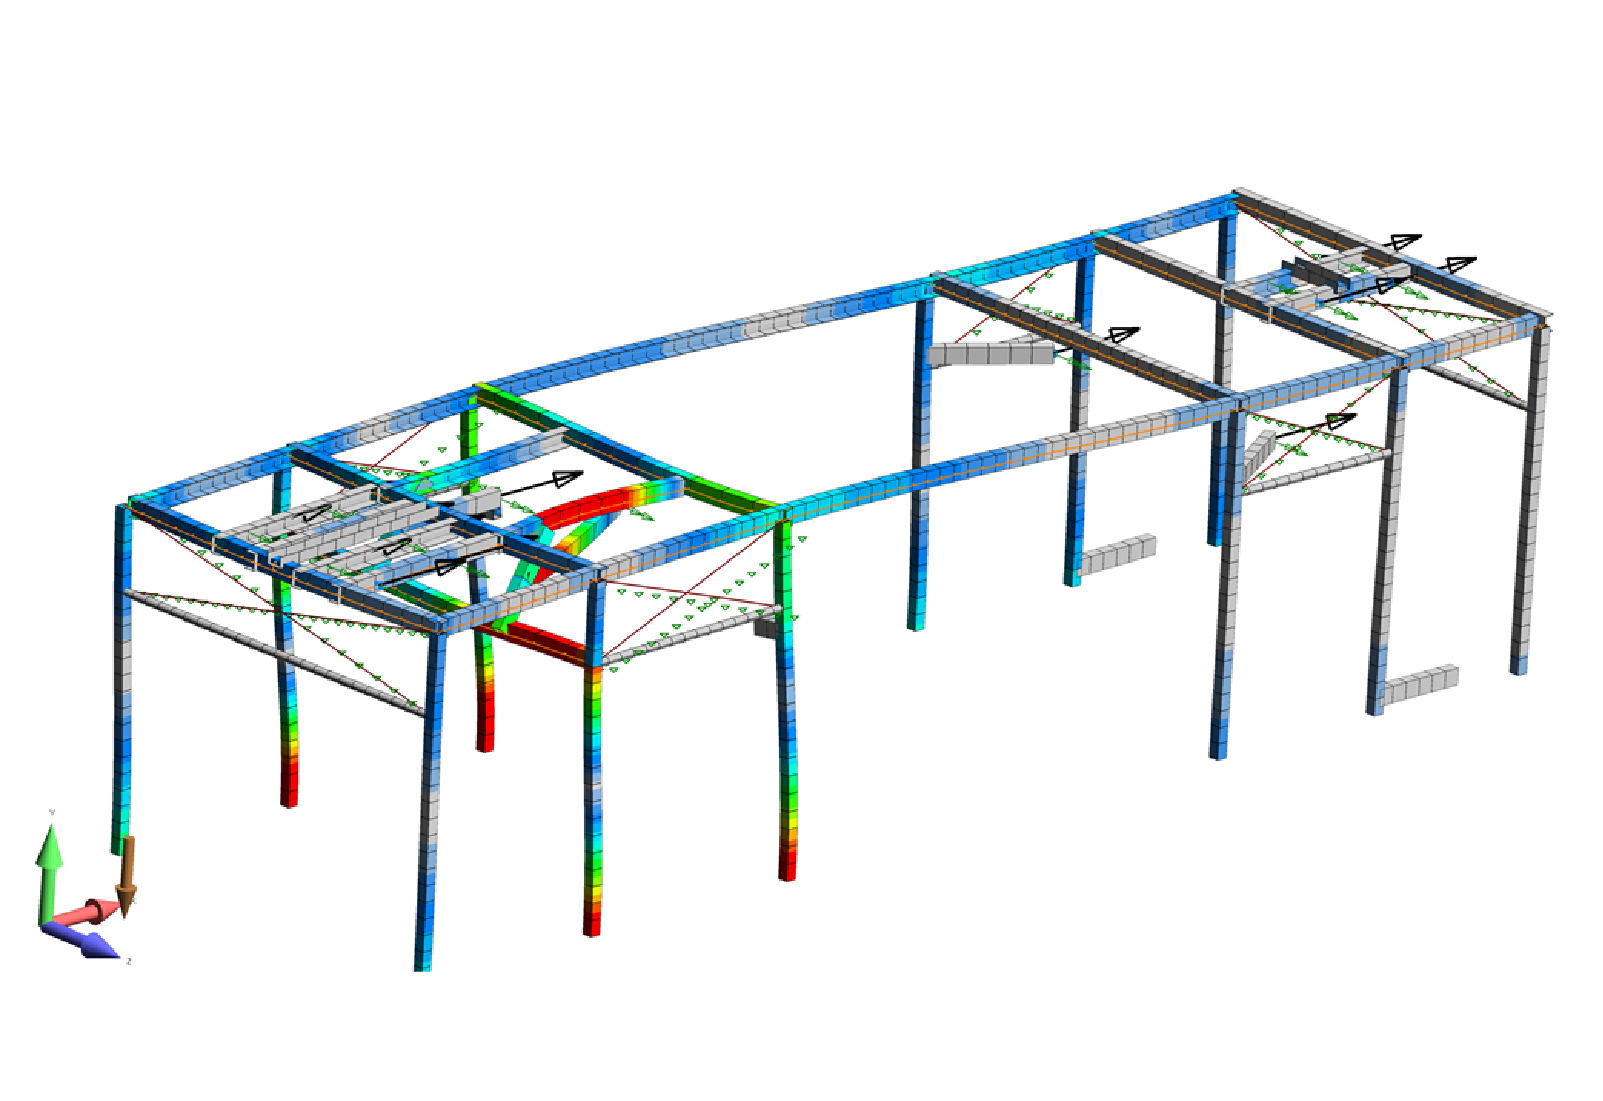 Predictive Engineering specializes in the idealization of structures and systems into numerical models.  The space frame structure above is an idealization of the steel frame of a automotive car wash system.  Loads were a combination of masses and forces to represent hanging weights and moving brushes.